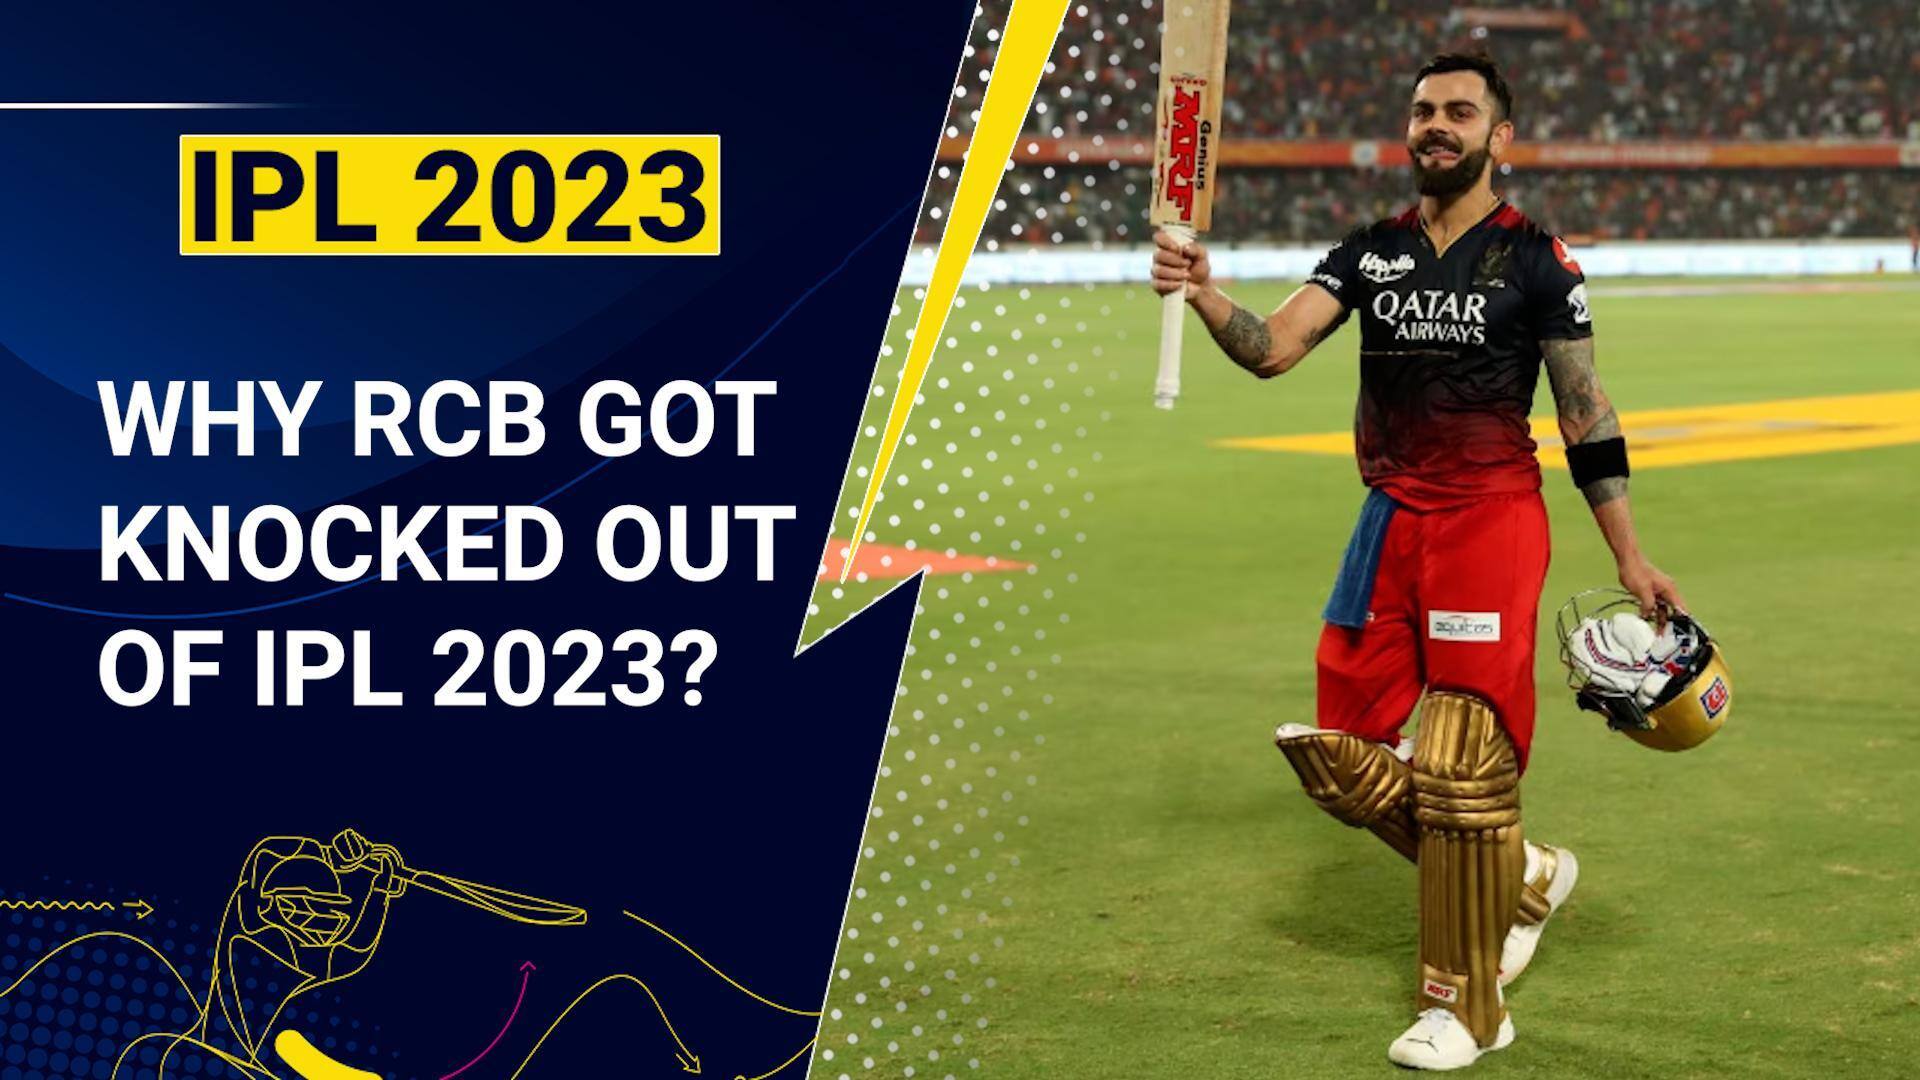 IPL 2023: What Are The Areas Of Concern For RCB That Knocked Them Out Of The IPL League Stage?